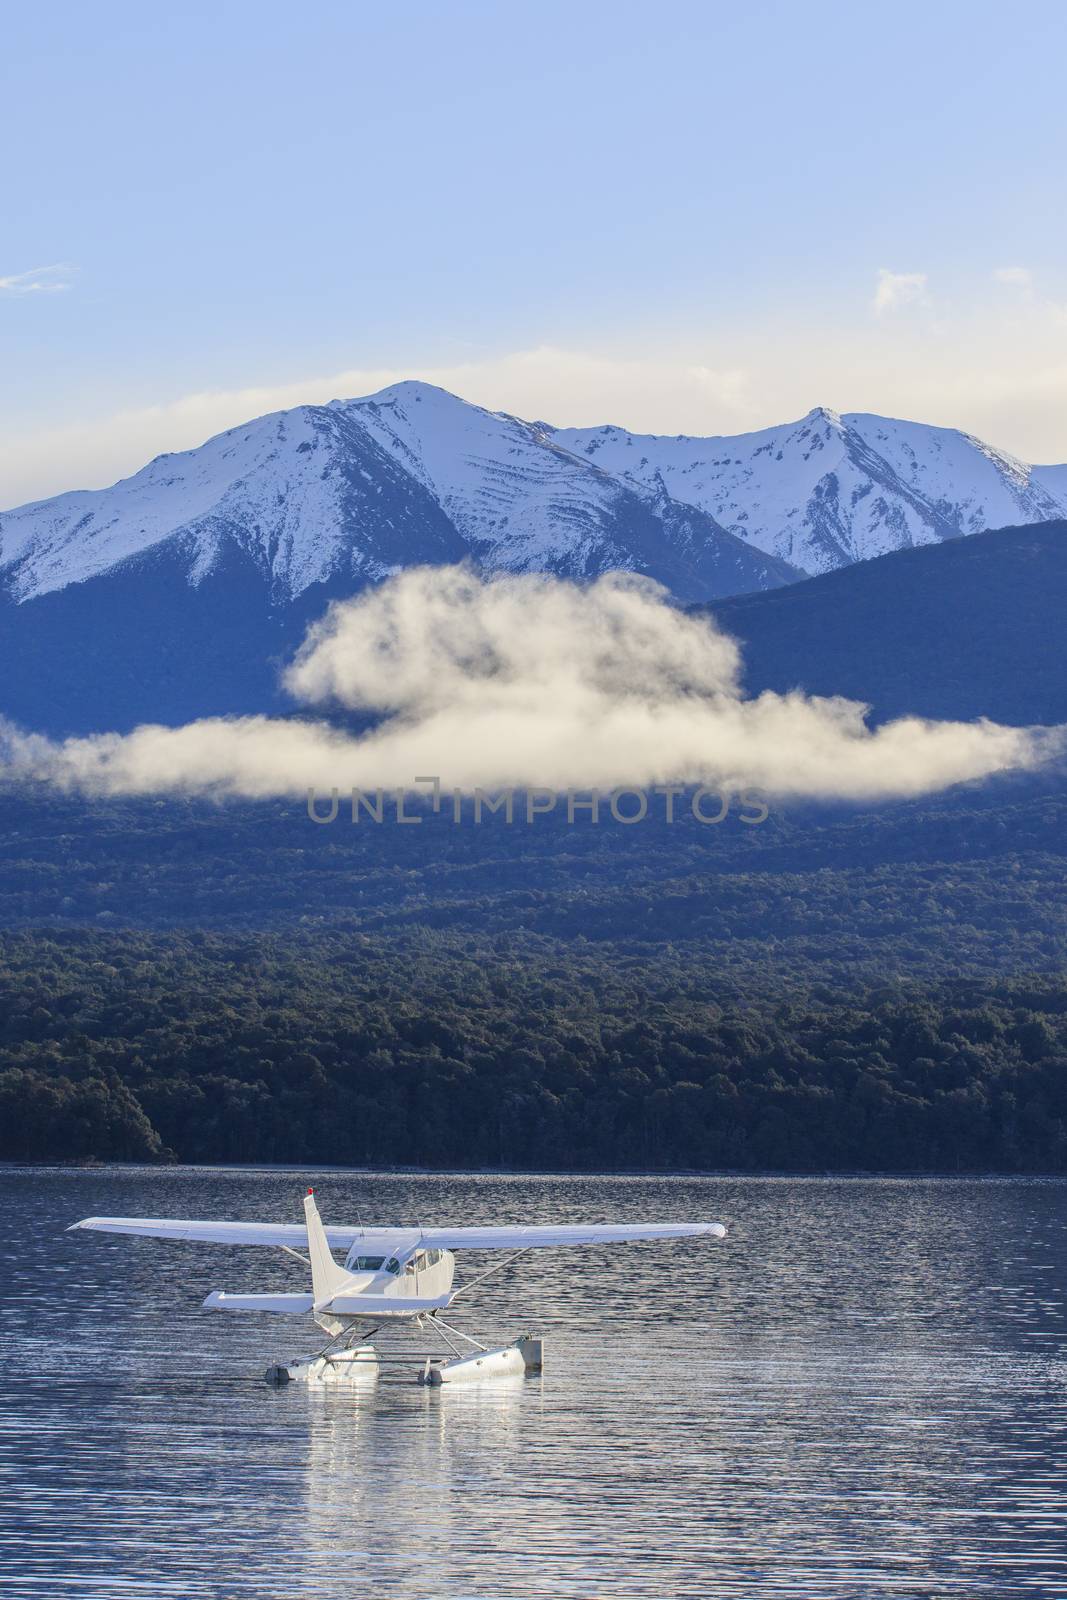 water plane floating in lake te anau fiordland national park new zealand important natural traveling destination